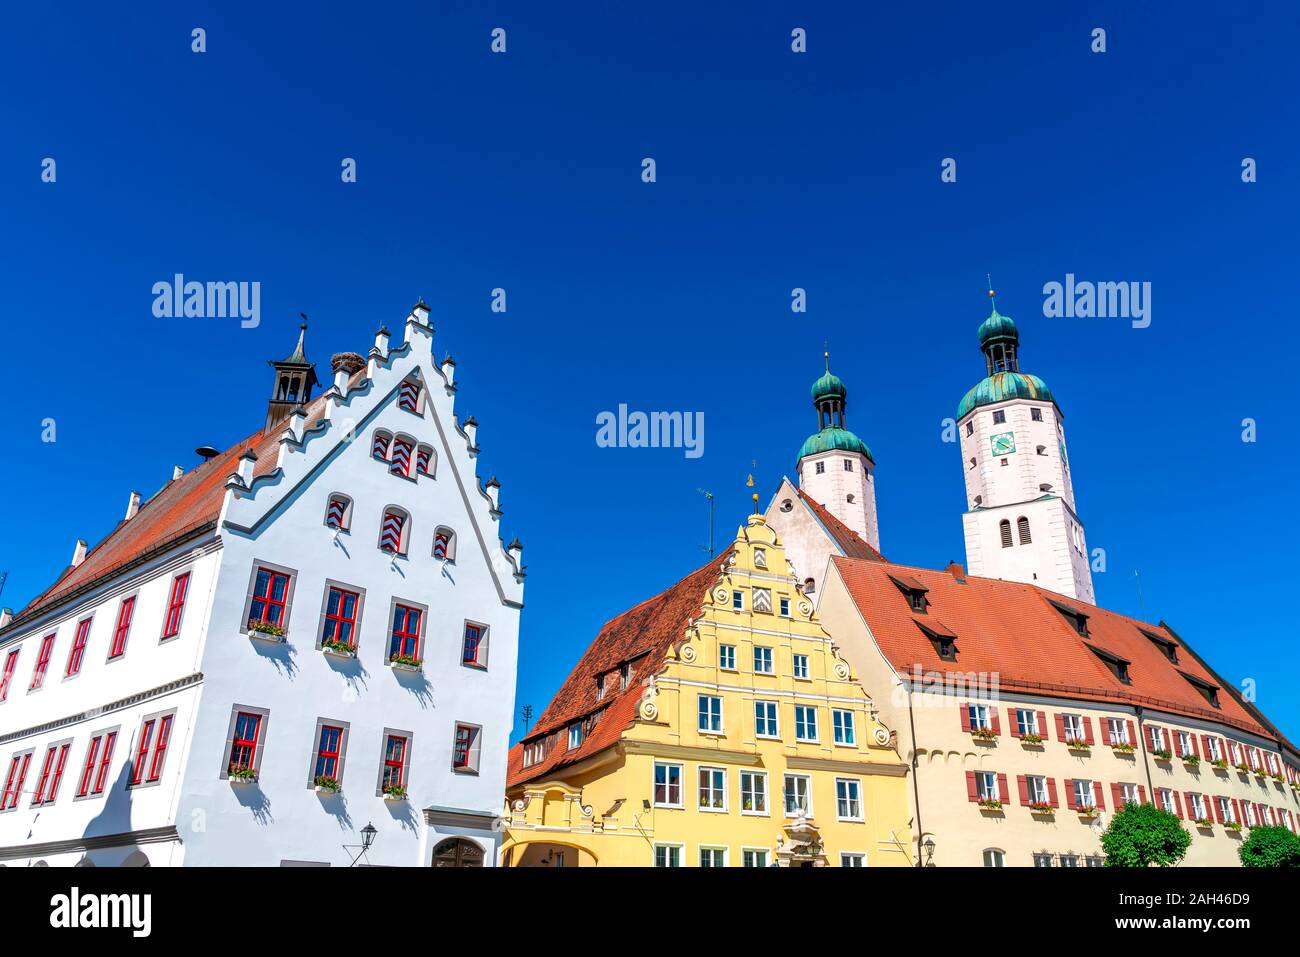 Germany, Bavaria, Wemding, Historic architecture of medieval German town Stock Photo